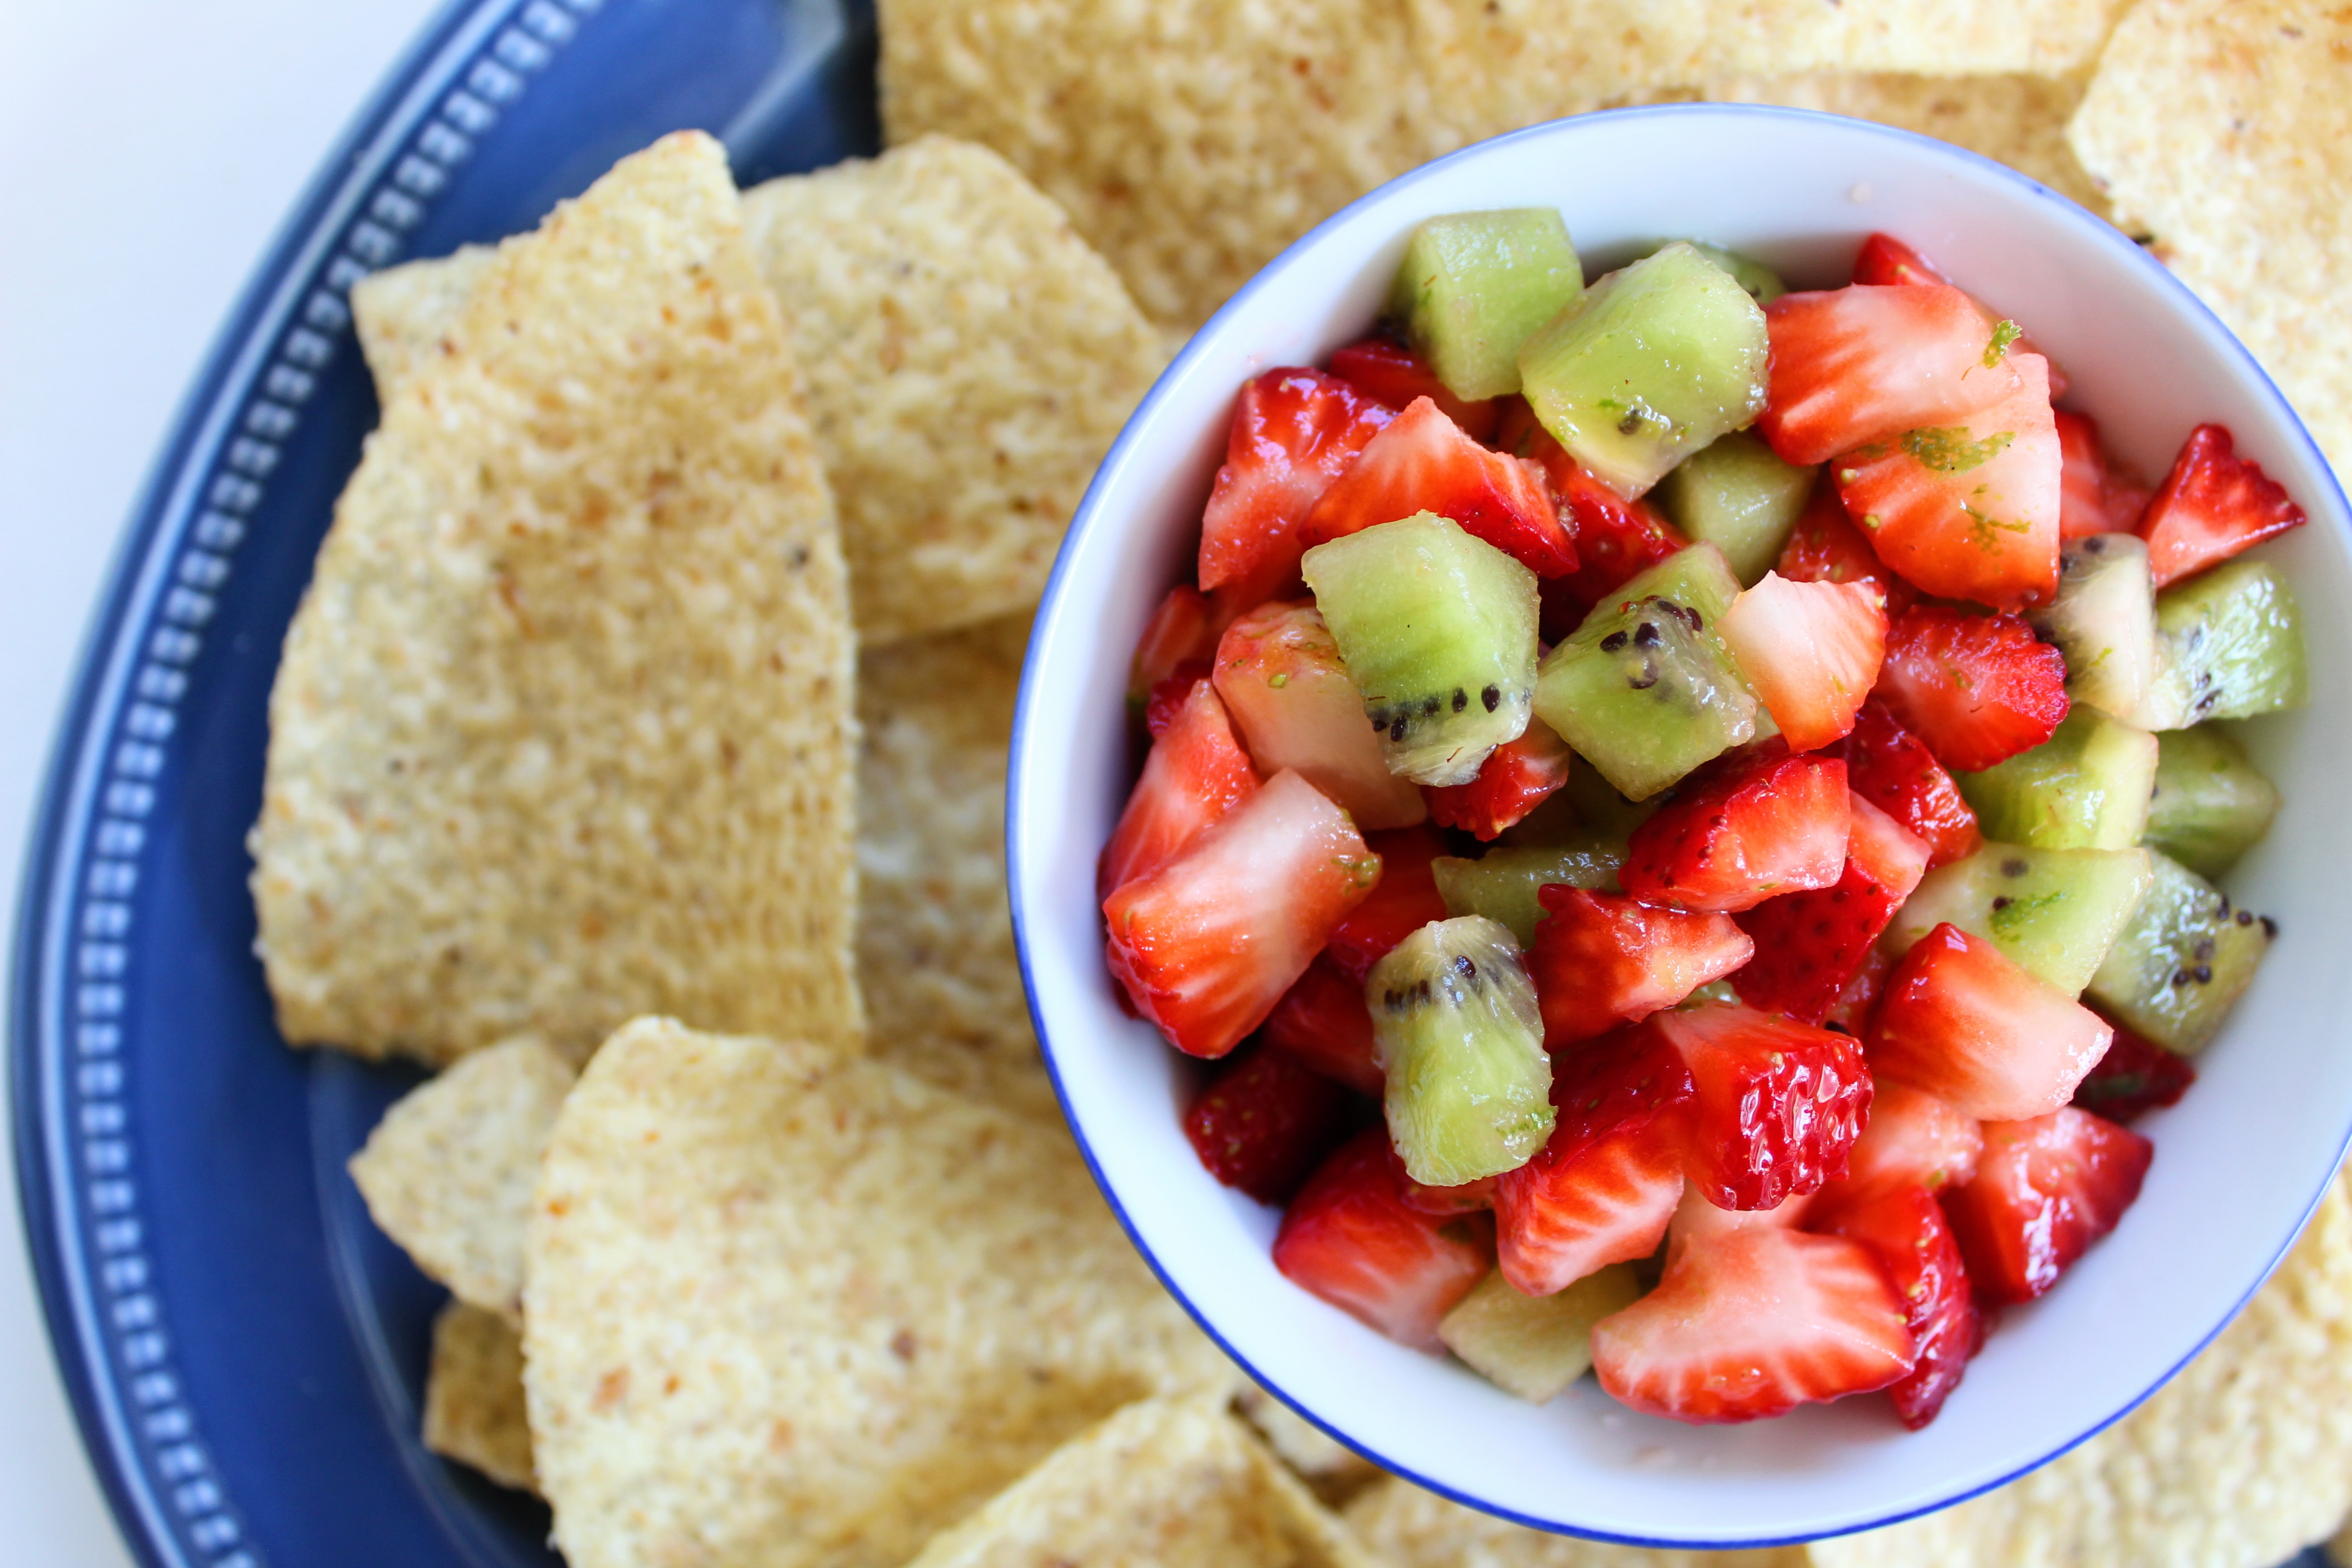 Fresh strawberries and kiwi are chopped and dressed in lime juice to make a simple homemade fruit salsa to serve with tortilla chips.